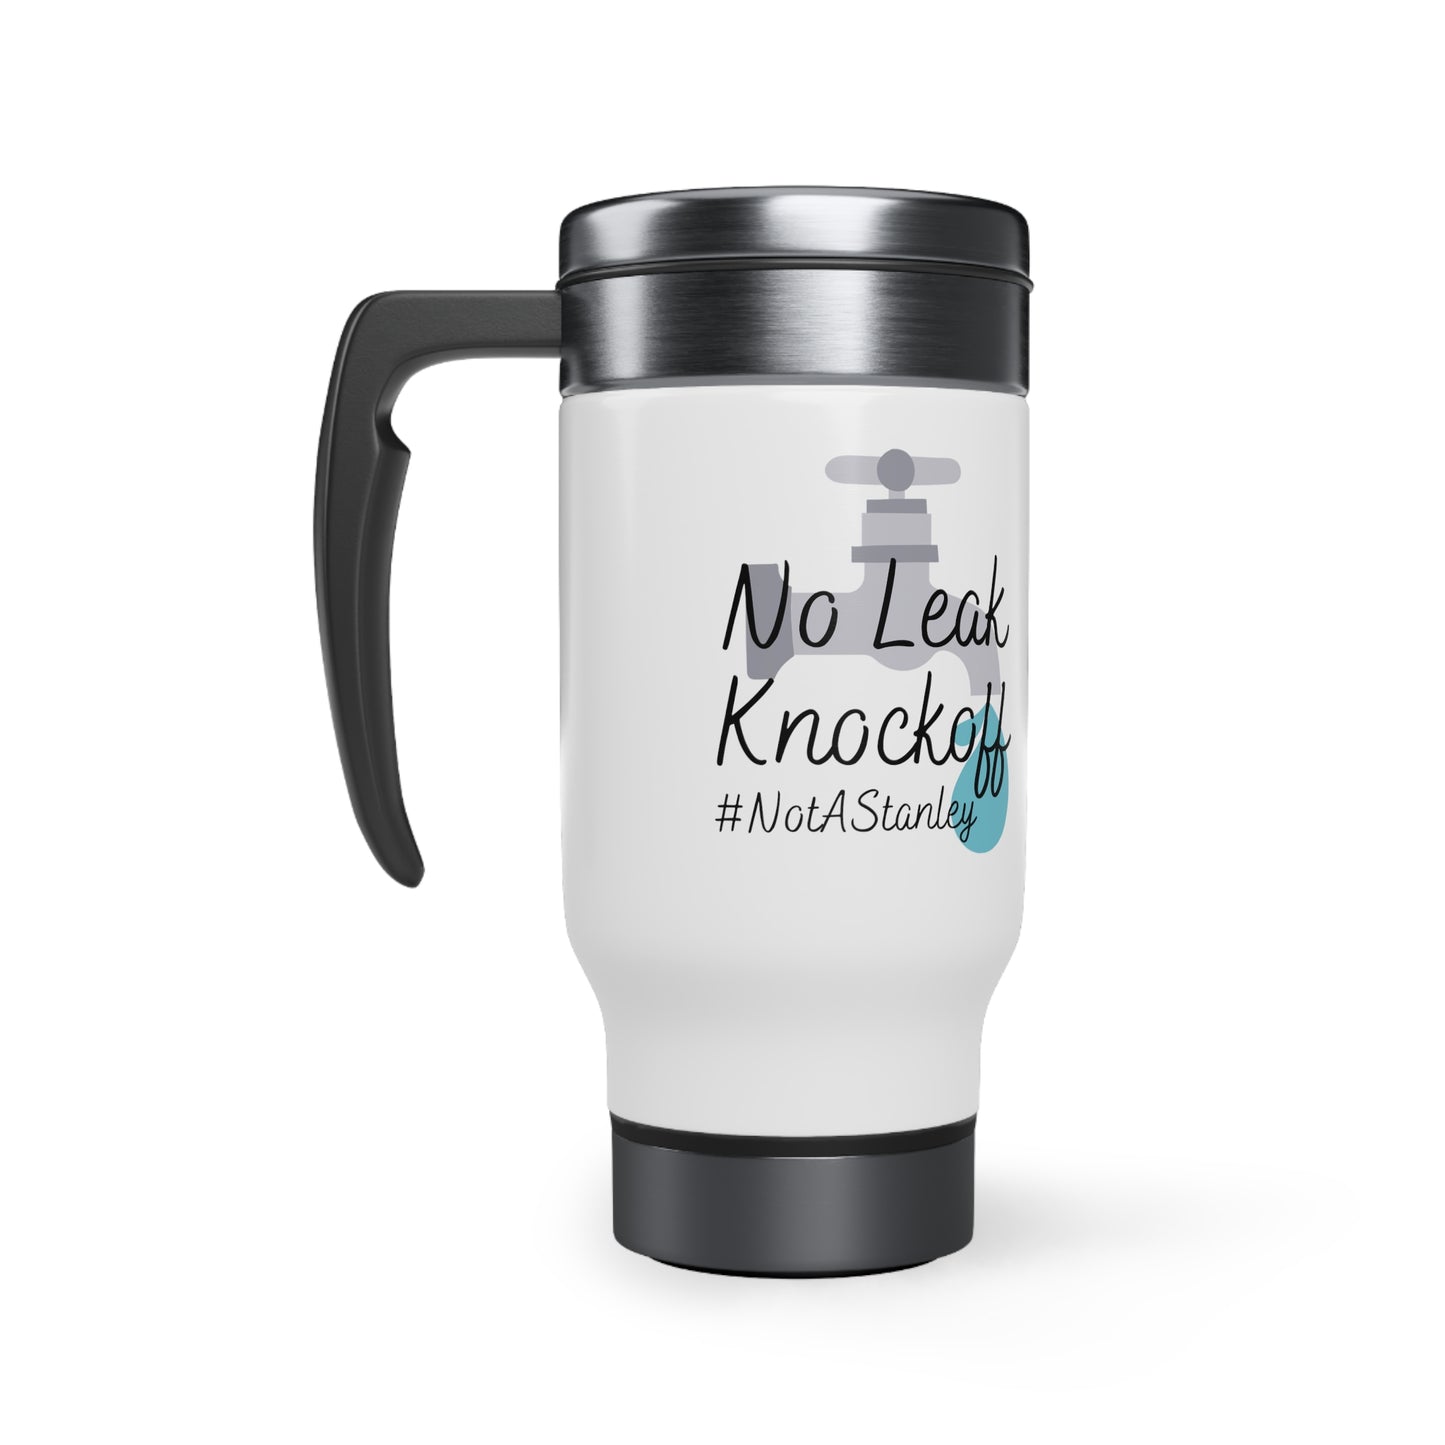 No Leak Knock Off #notastanley - Stainless Steel Travel Mug with Handle, 14oz